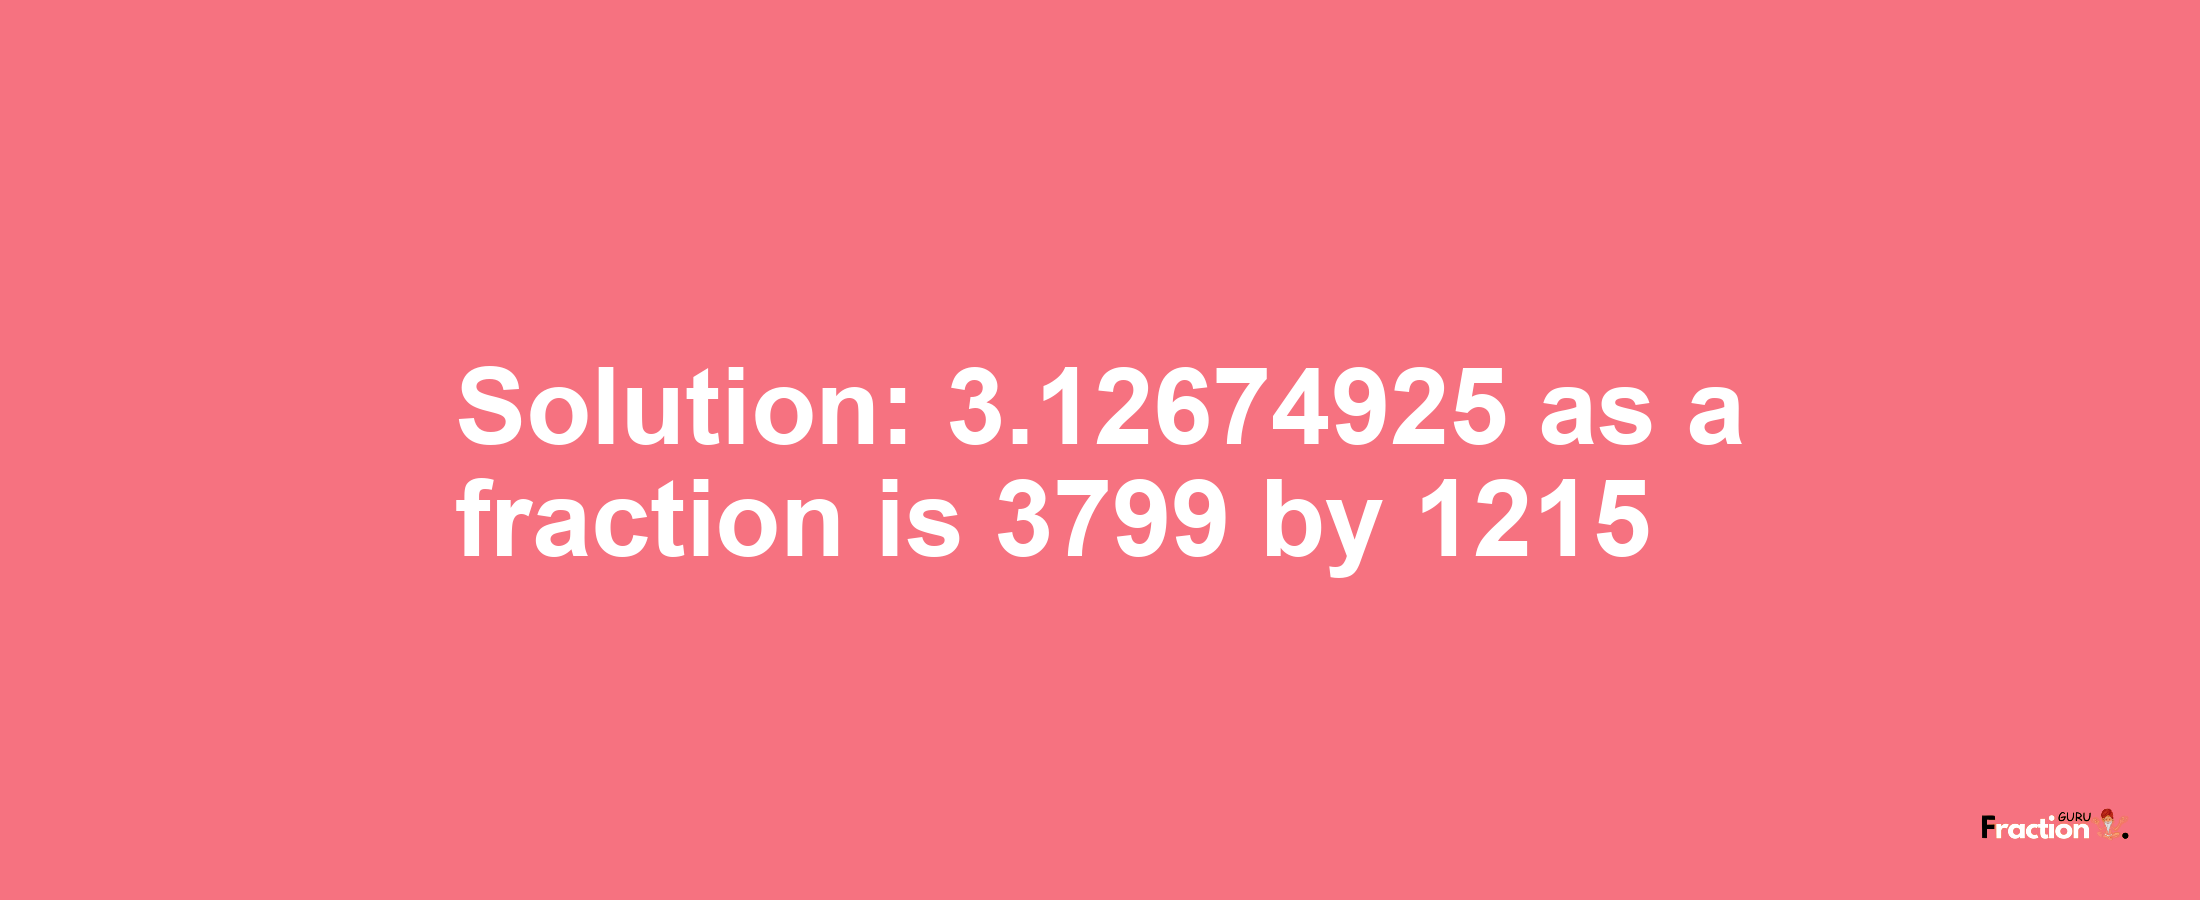 Solution:3.12674925 as a fraction is 3799/1215